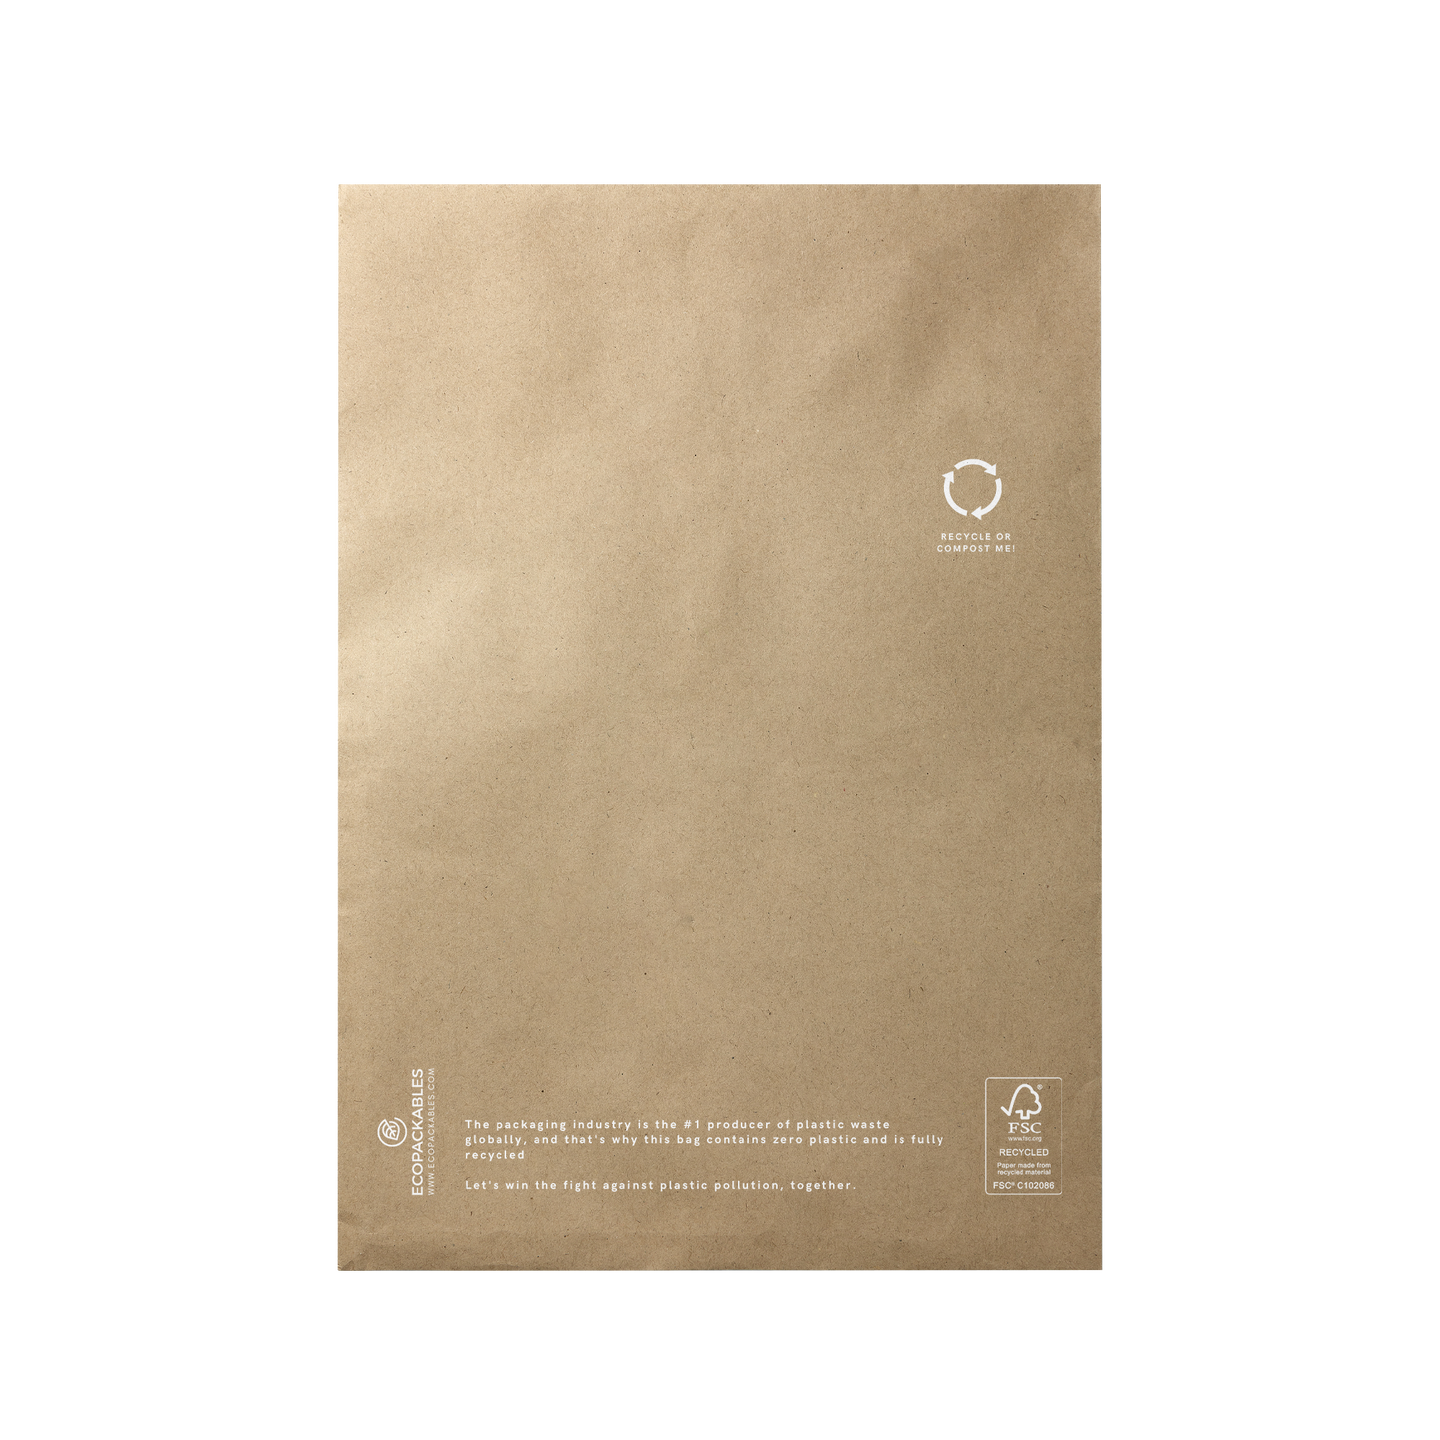 recycled kraft paper mailer free shipping